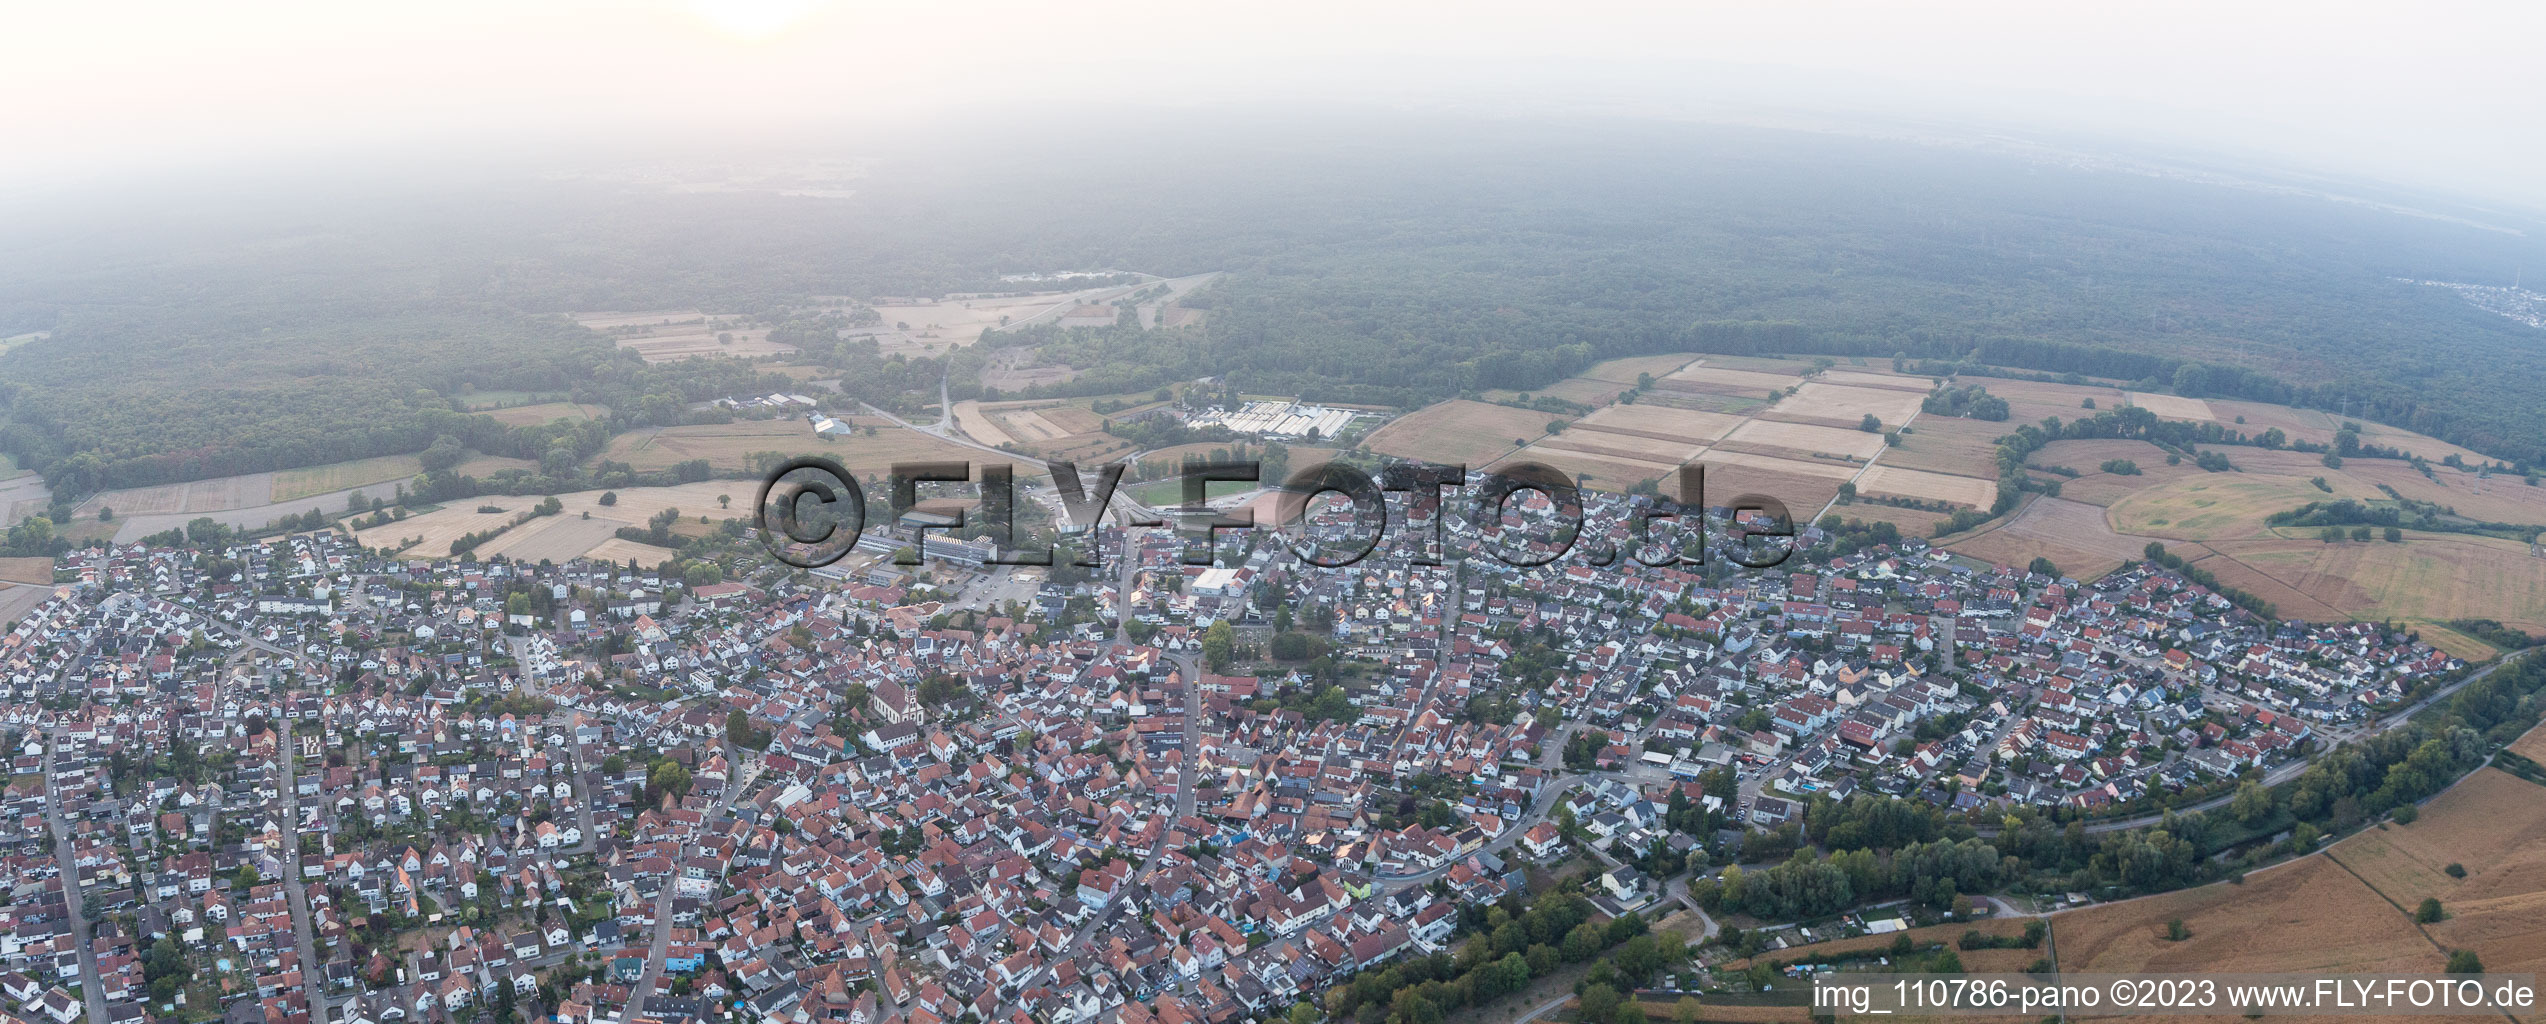 Drone image of Hagenbach in the state Rhineland-Palatinate, Germany